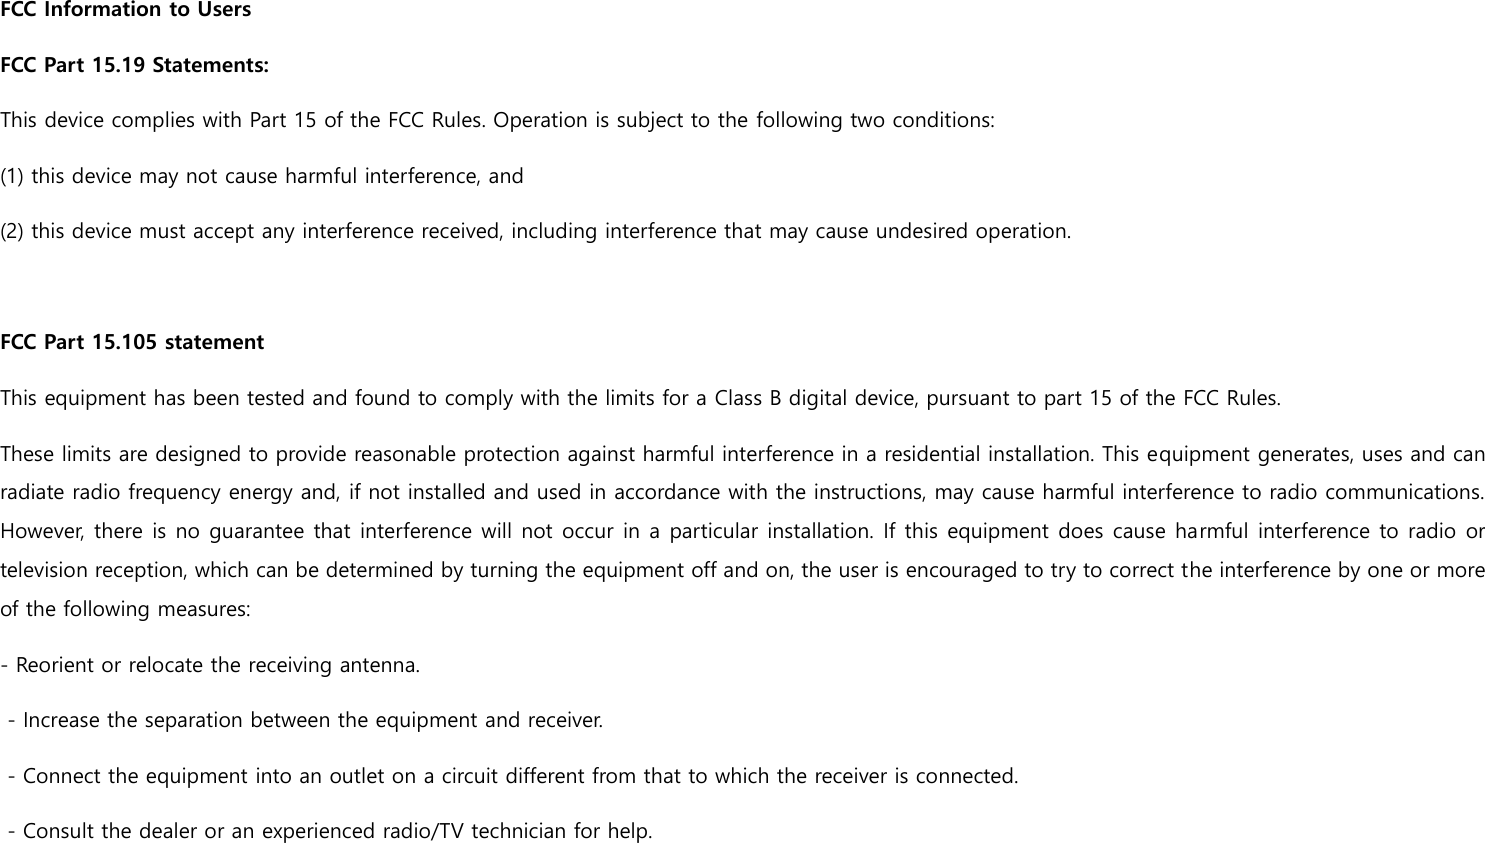 FCC Information to Users FCC Part 15.19 Statements:   This device complies with Part 15 of the FCC Rules. Operation is subject to the following two conditions:   (1) this device may not cause harmful interference, and   (2) this device must accept any interference received, including interference that may cause undesired operation.  FCC Part 15.105 statement This equipment has been tested and found to comply with the limits for a Class B digital device, pursuant to part 15 of the FCC Rules.   These limits are designed to provide reasonable protection against harmful interference in a residential installation. This equipment generates, uses and can radiate radio frequency energy and, if not installed and used in accordance with the instructions, may cause harmful interference to radio communications. However, there is no guarantee that  interference will not occur in a particular installation. If this equipment does cause harmful interference to radio or television reception, which can be determined by turning the equipment off and on, the user is encouraged to try to correct the interference by one or more of the following measures: - Reorient or relocate the receiving antenna.    - Increase the separation between the equipment and receiver.    - Connect the equipment into an outlet on a circuit different from that to which the receiver is connected.    - Consult the dealer or an experienced radio/TV technician for help.     